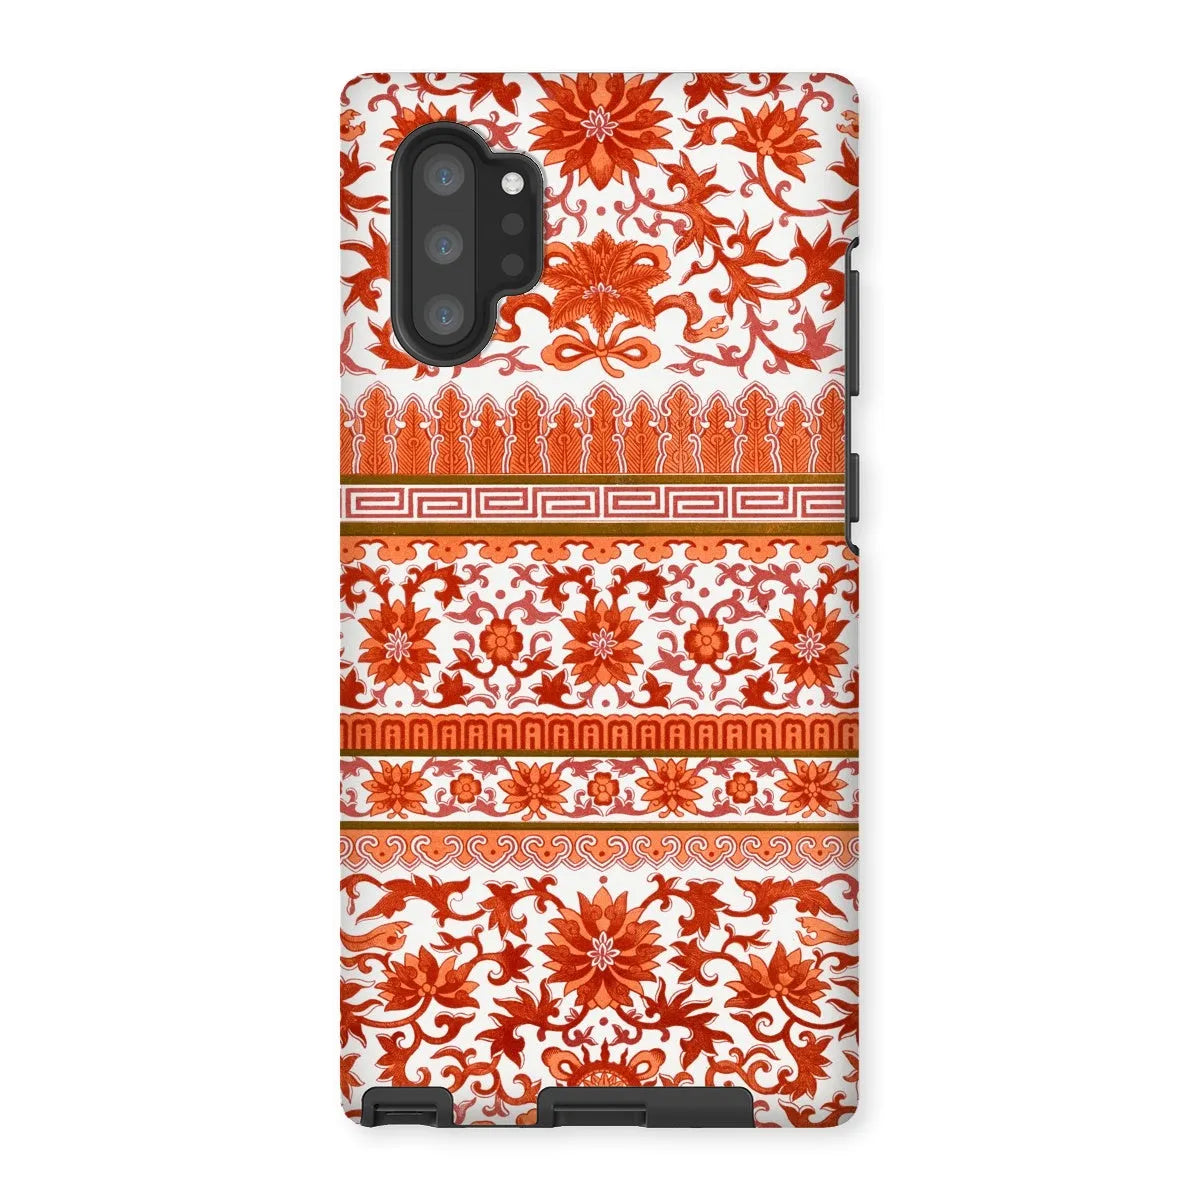 Fiery Chinese Floral Aesthetic Art Phone Case - Owen Jones - Samsung Galaxy Note 10p / Matte - Mobile Phone Cases